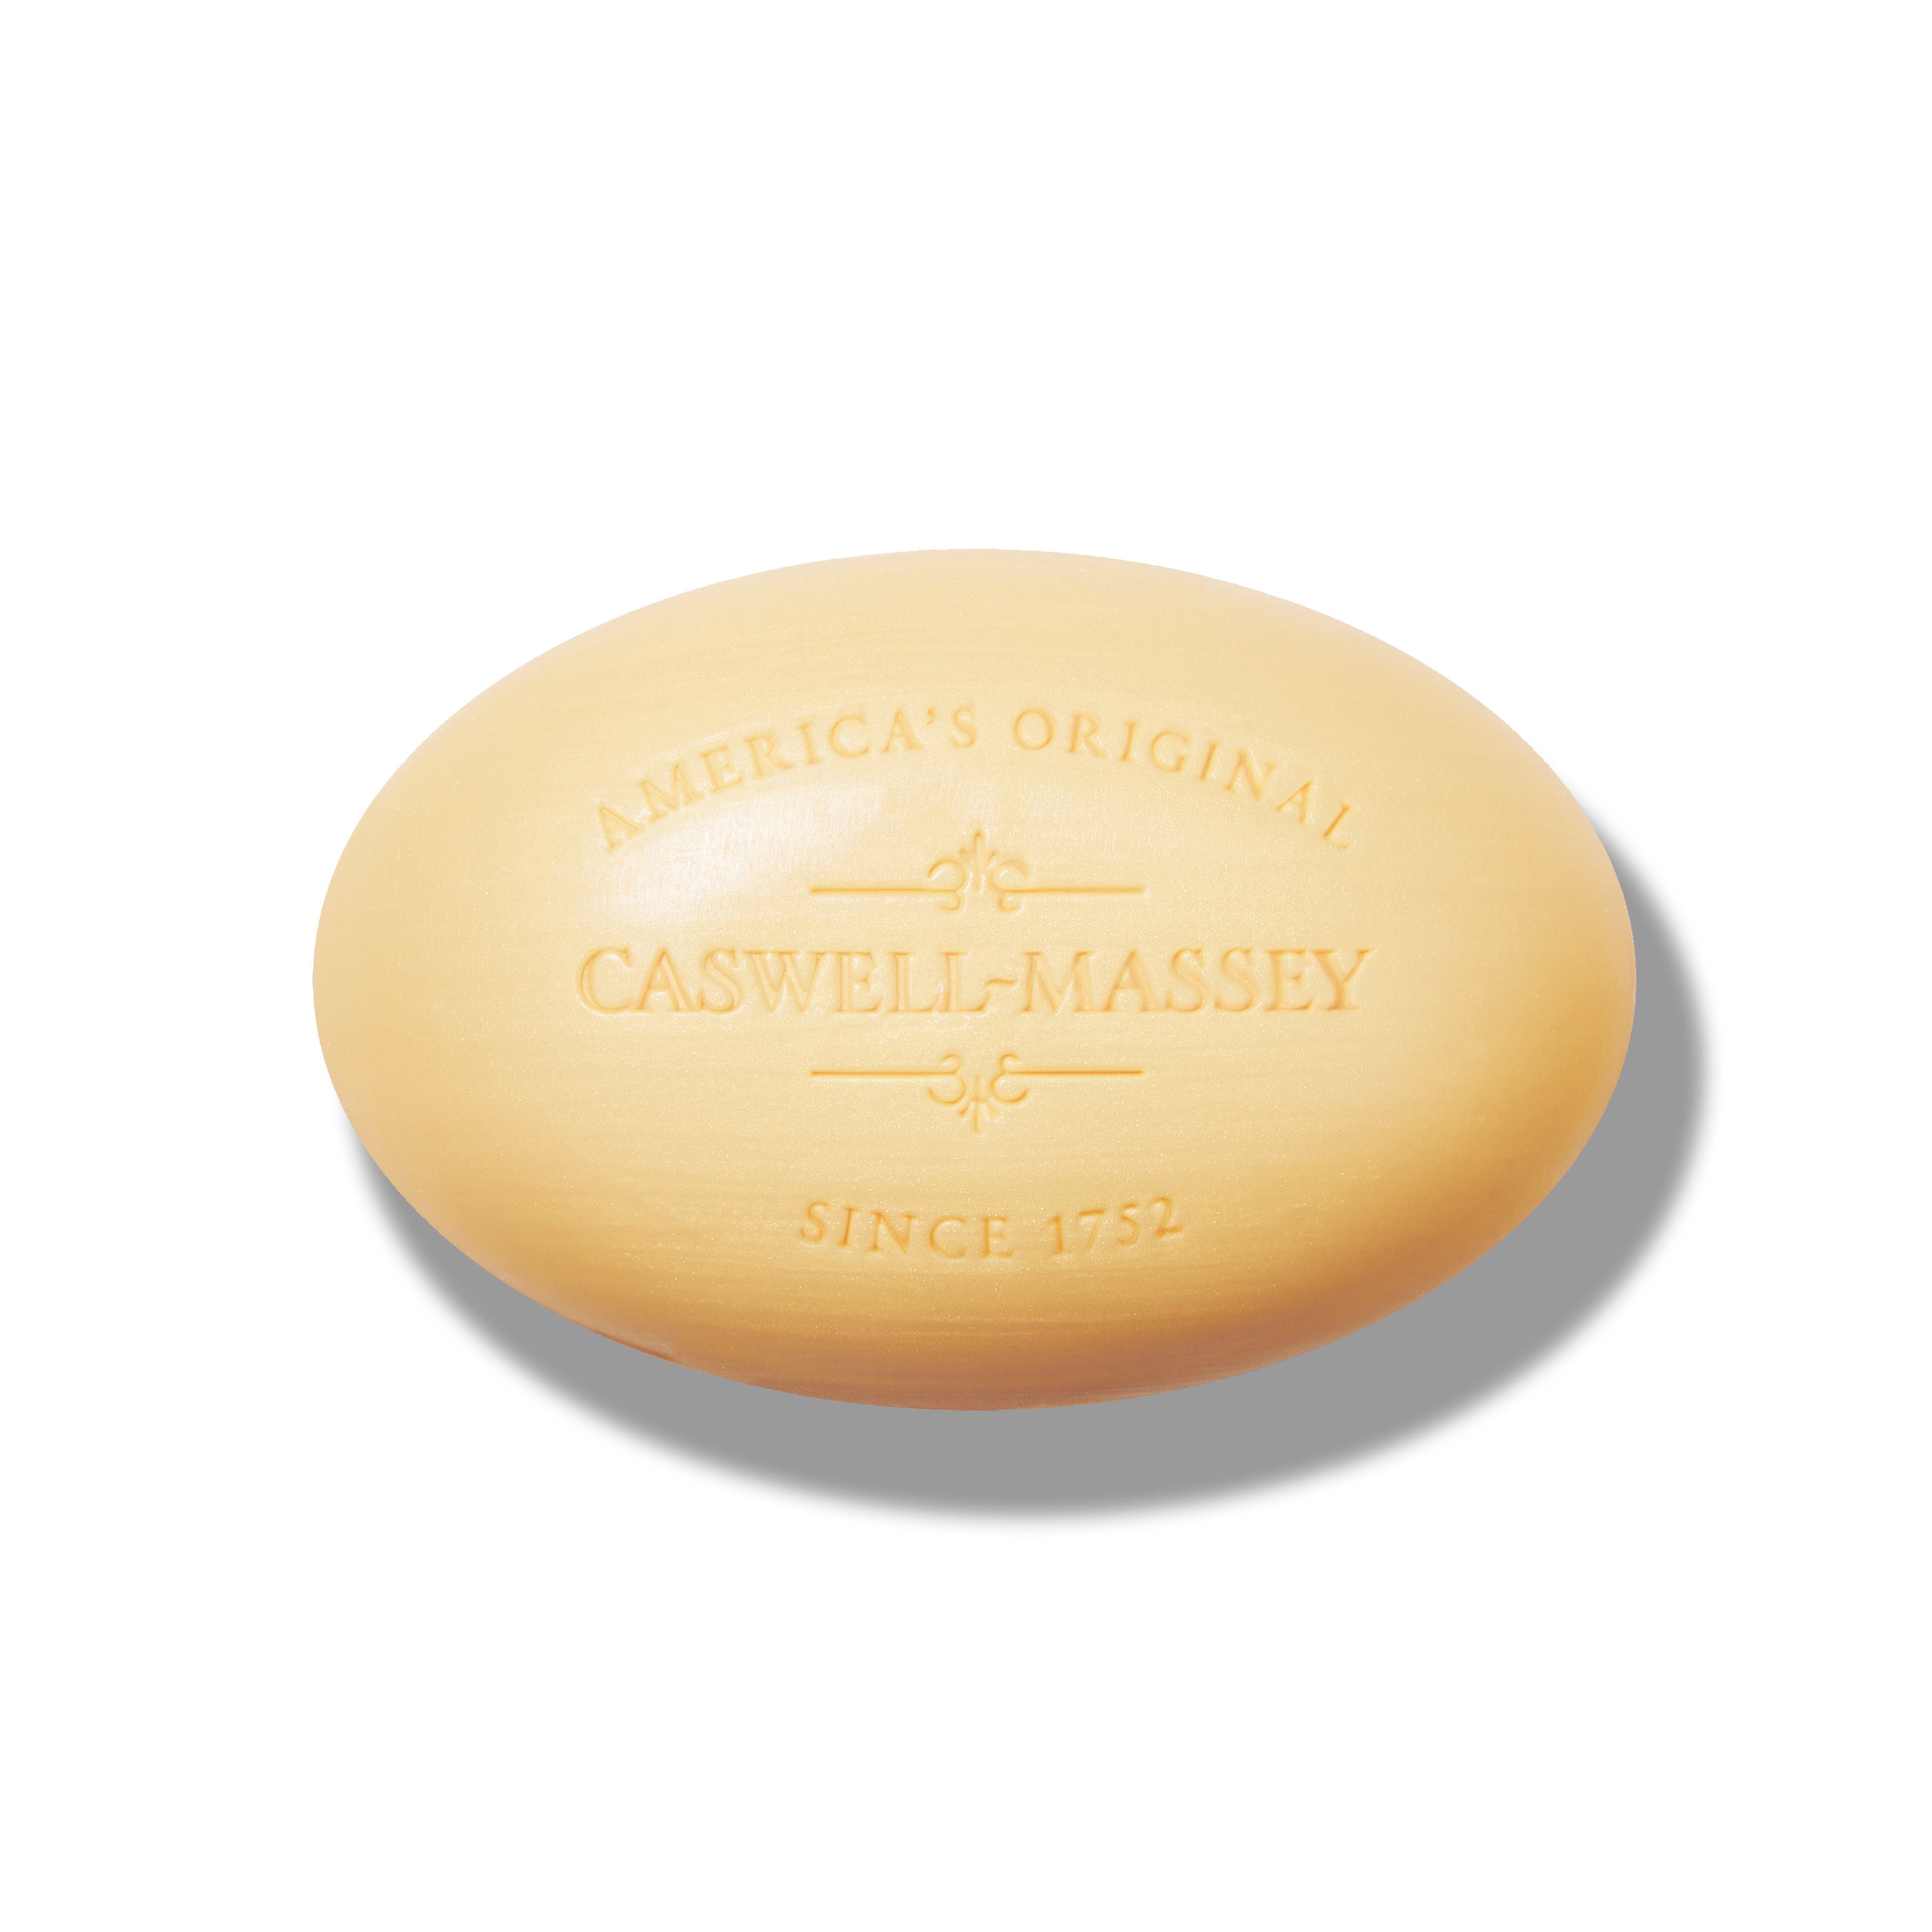 Caswell-Massey 2571 Bar Soap, natural cream-colored, oval bar soap, 5.8oz with logo stamped into surface